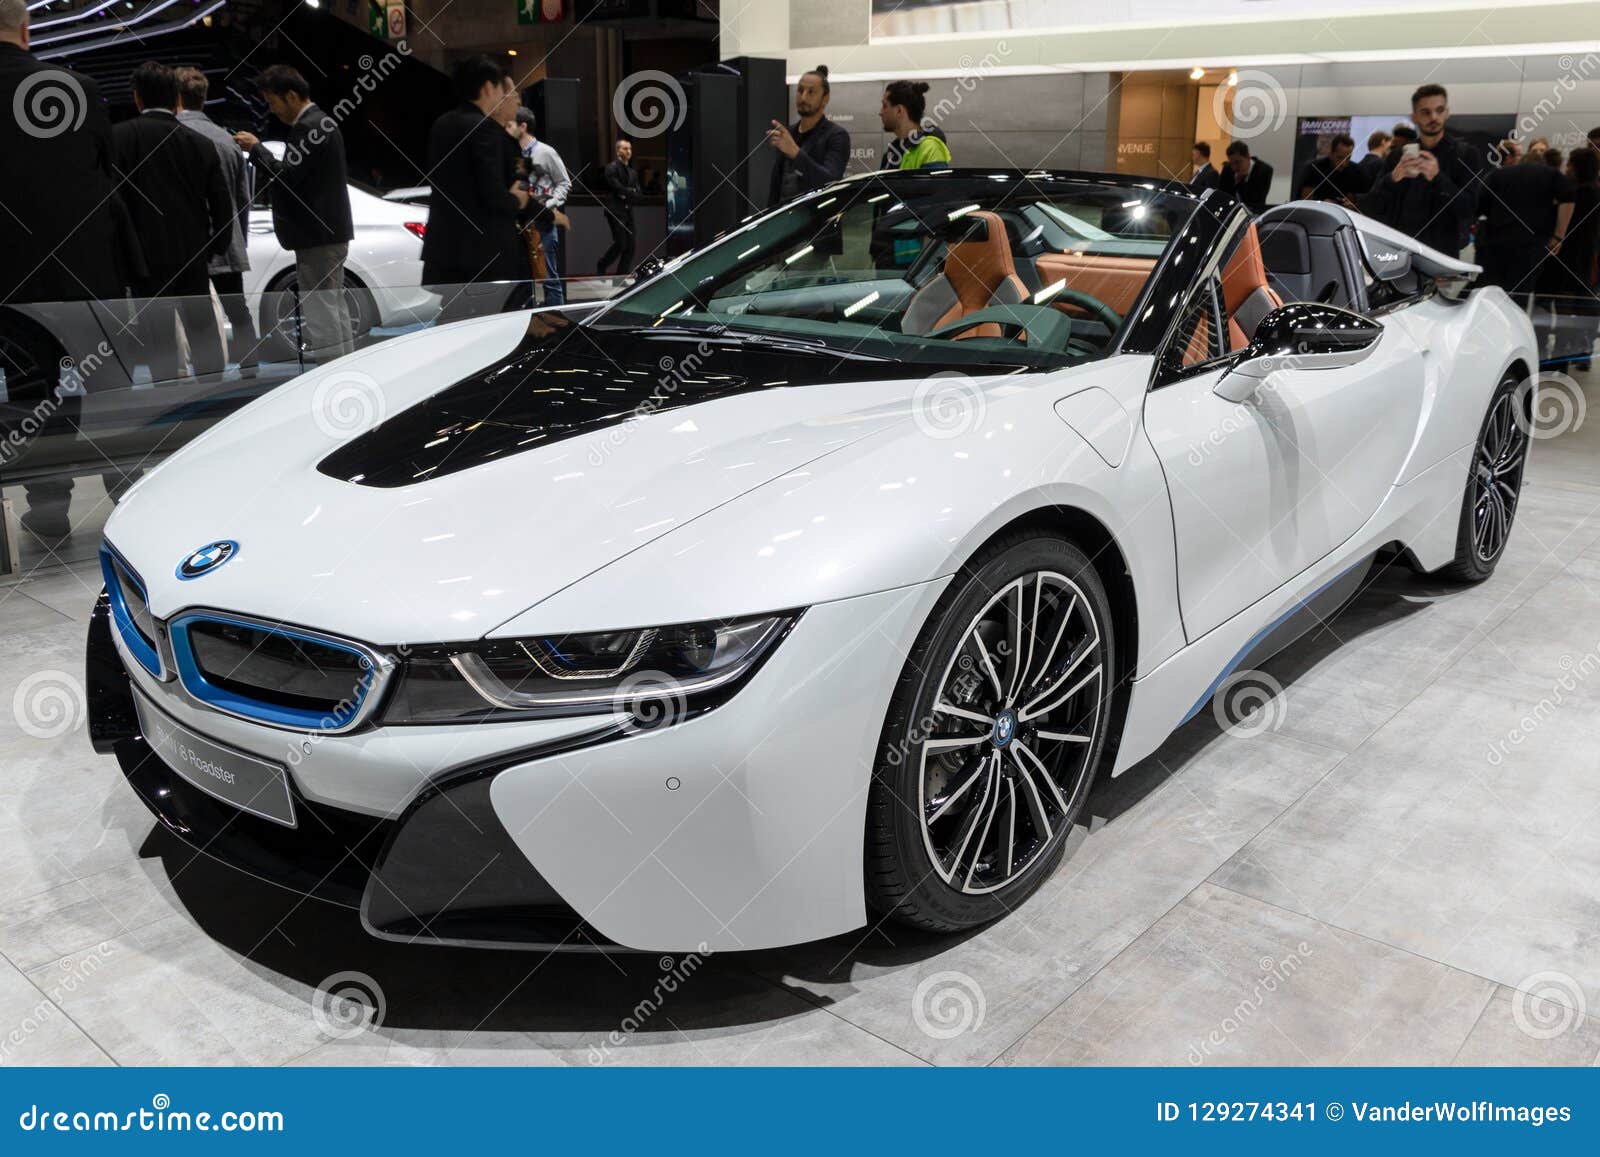 bmw i roadster electric sports car paris oct showcased motor show image